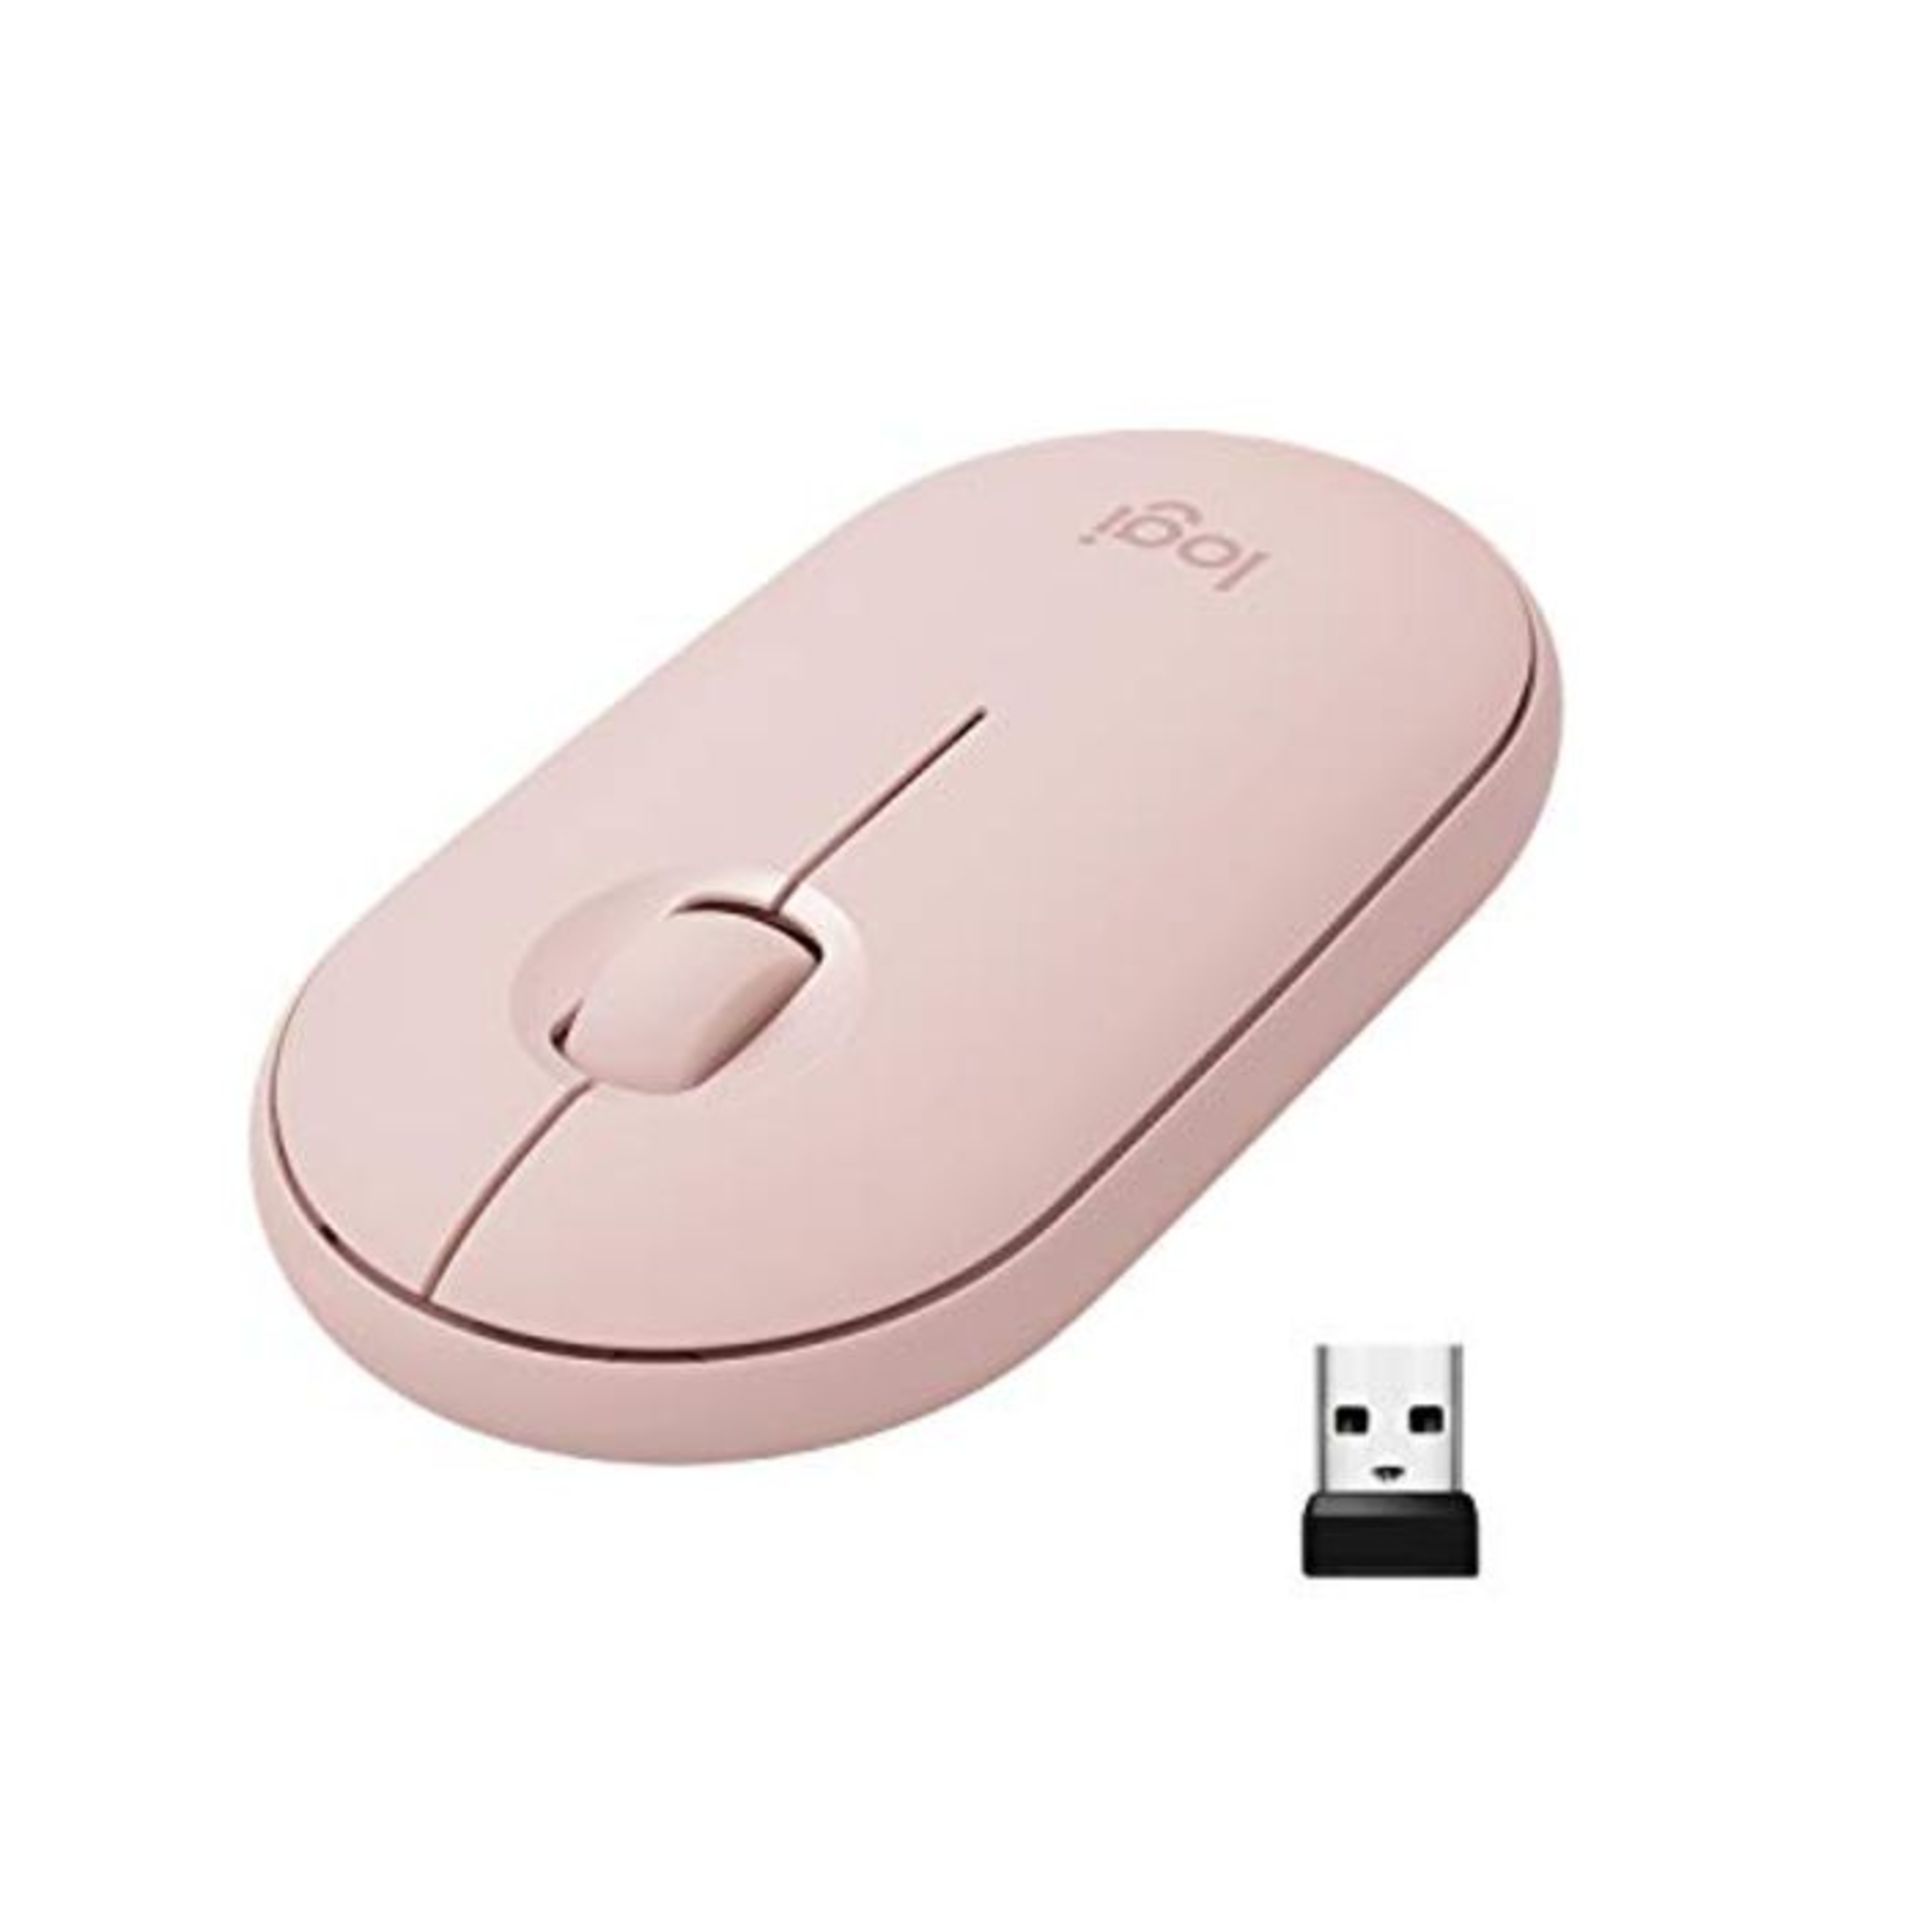 Logitech Pebble Wireless Mouse, Bluetooth or 2.4 GHz with USB Mini-Receiver, Silent, S